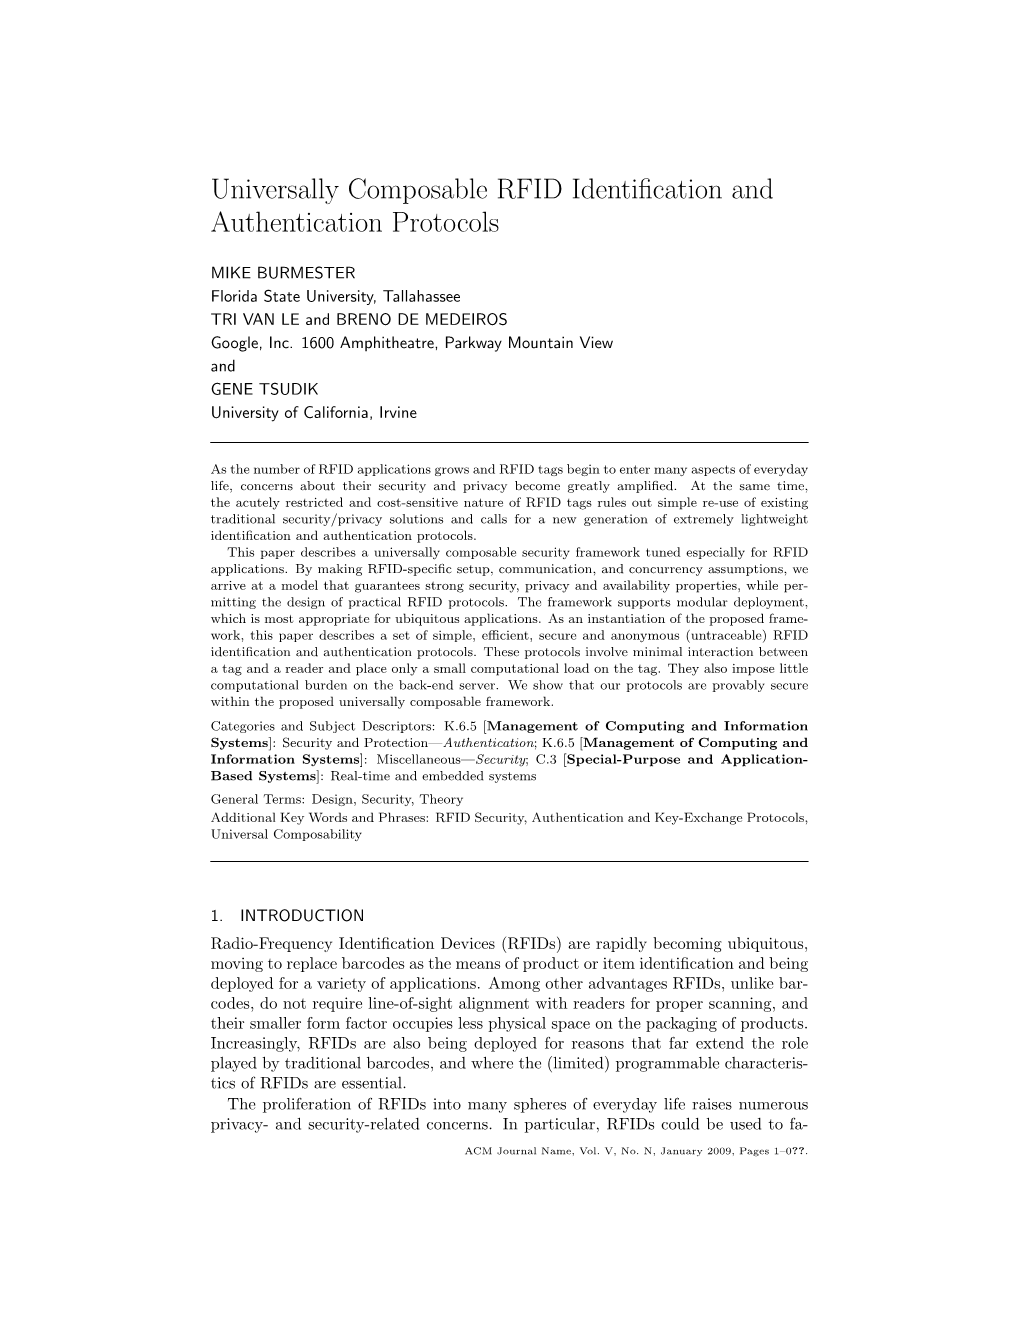 Universally Composable RFID Identification and Authentication